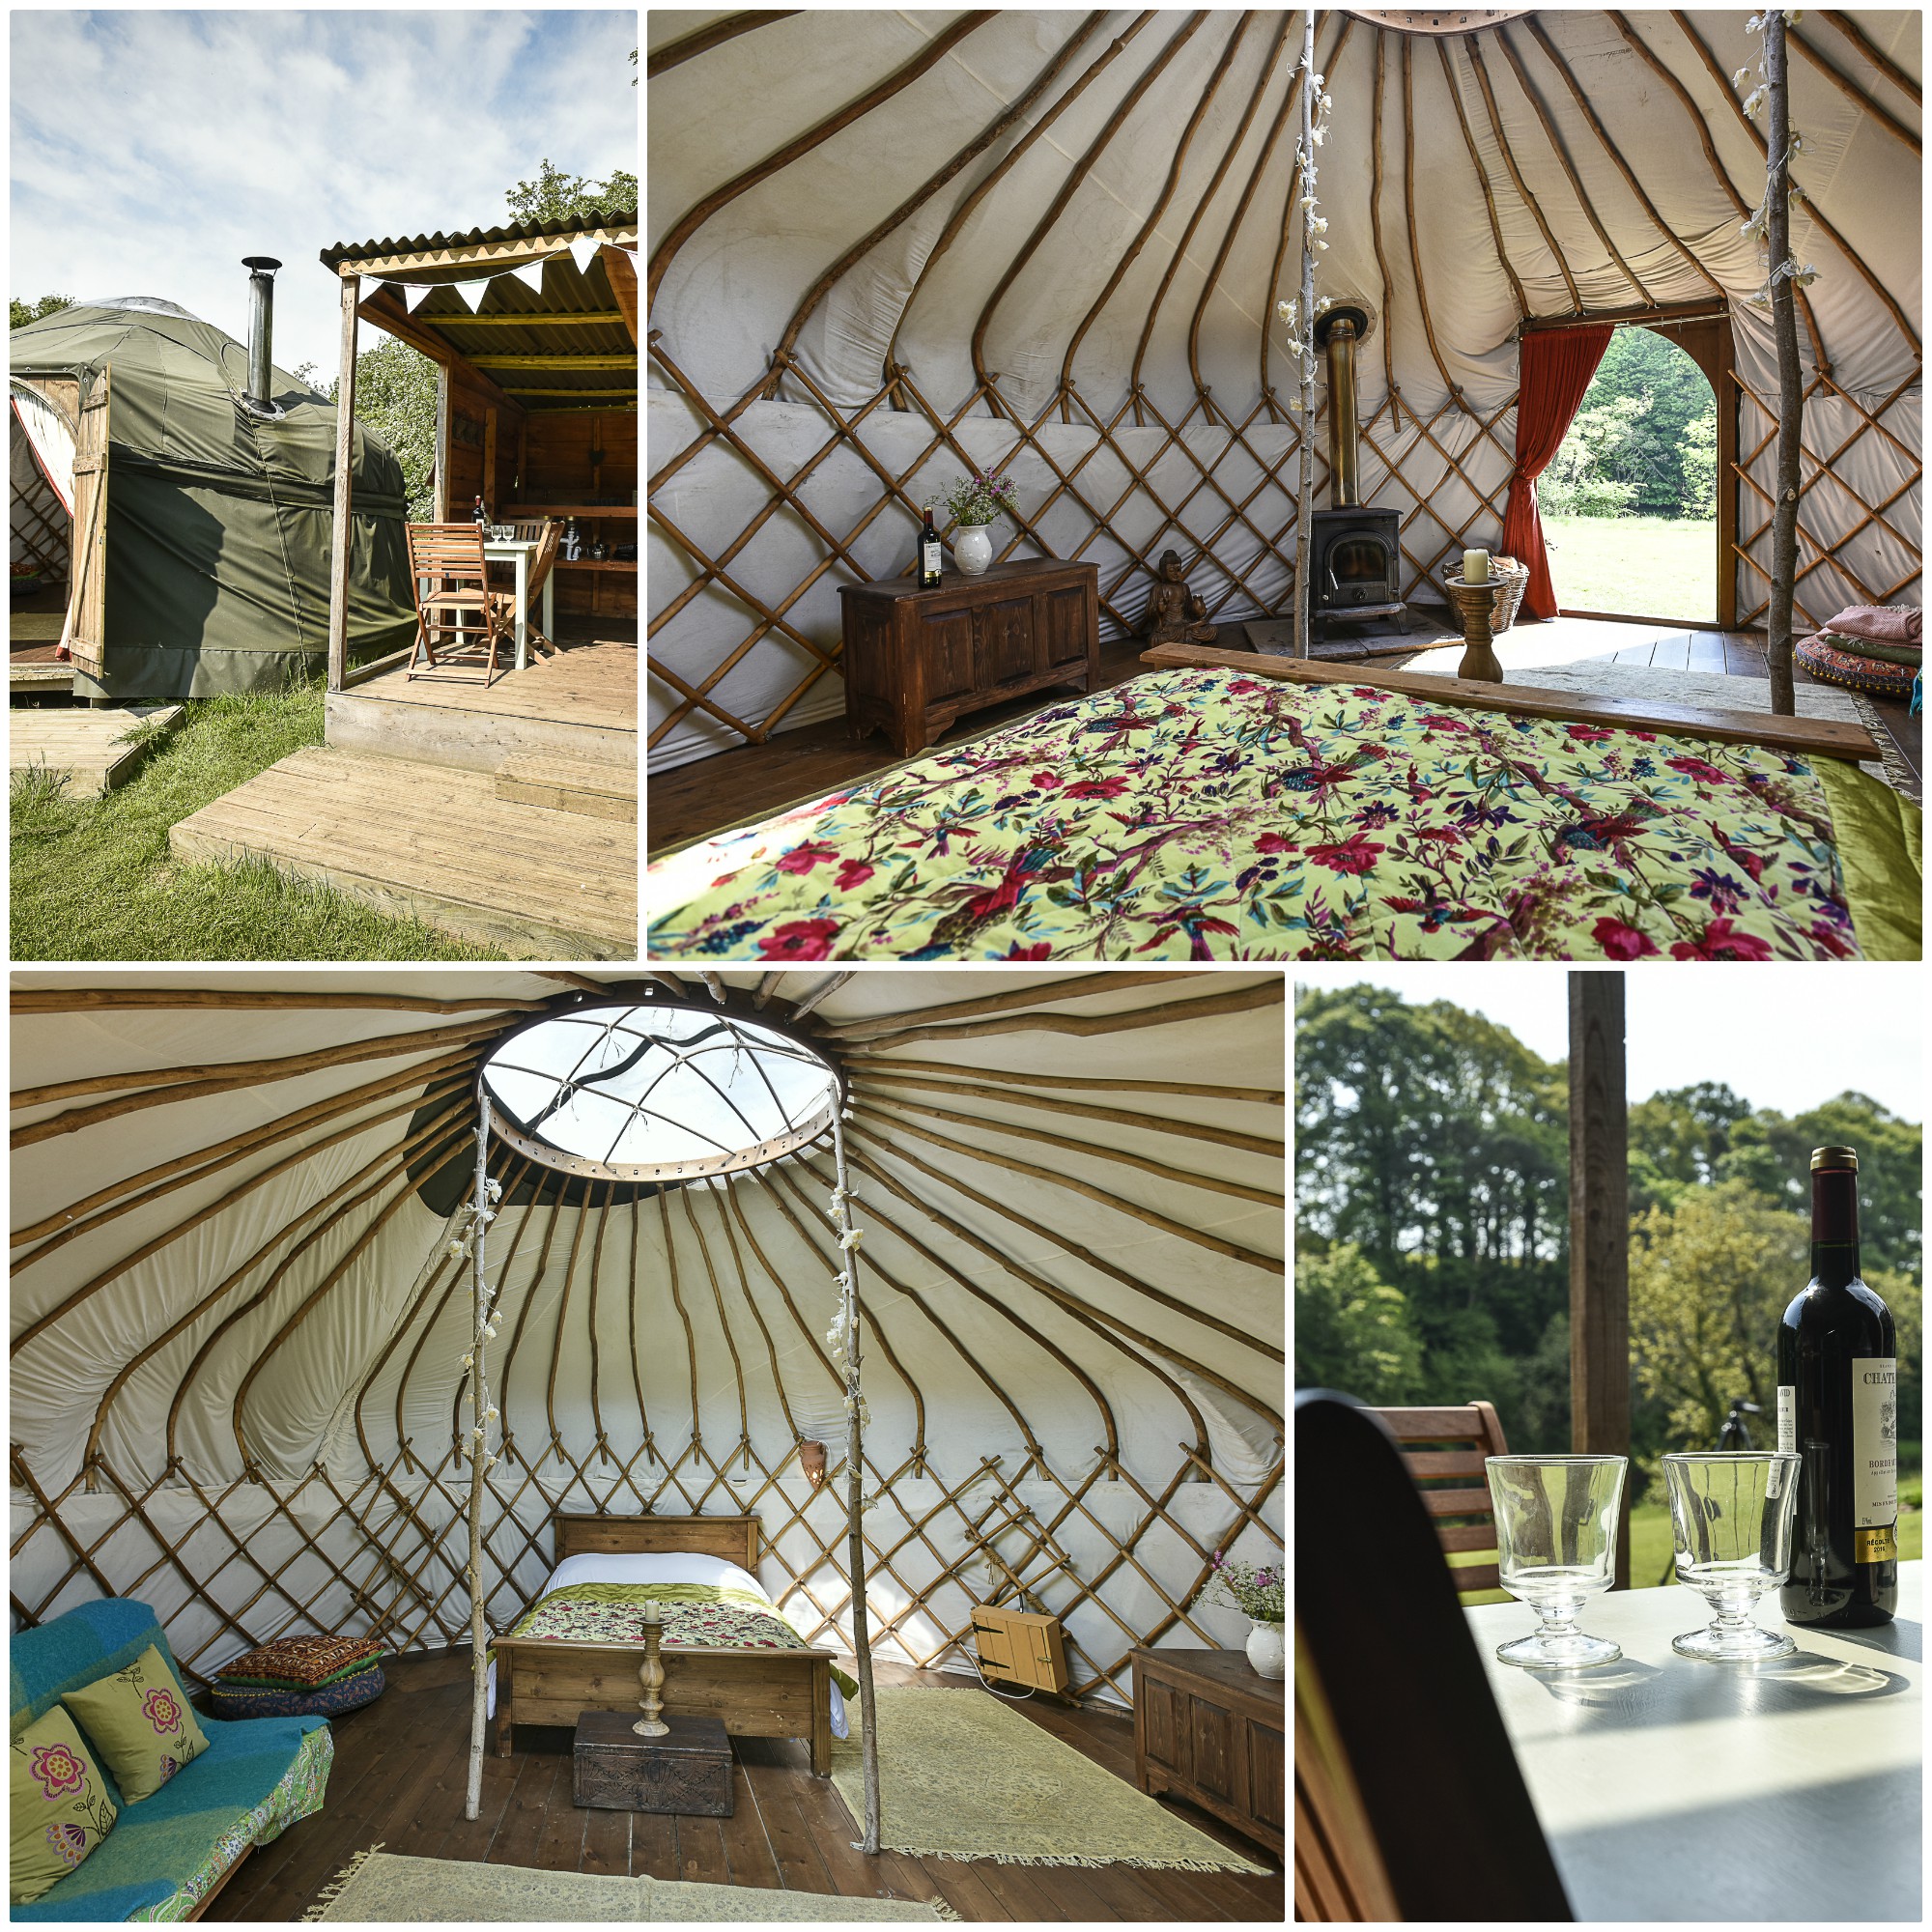 Beautiful Yurt with Hot Tub in the Eden Valley